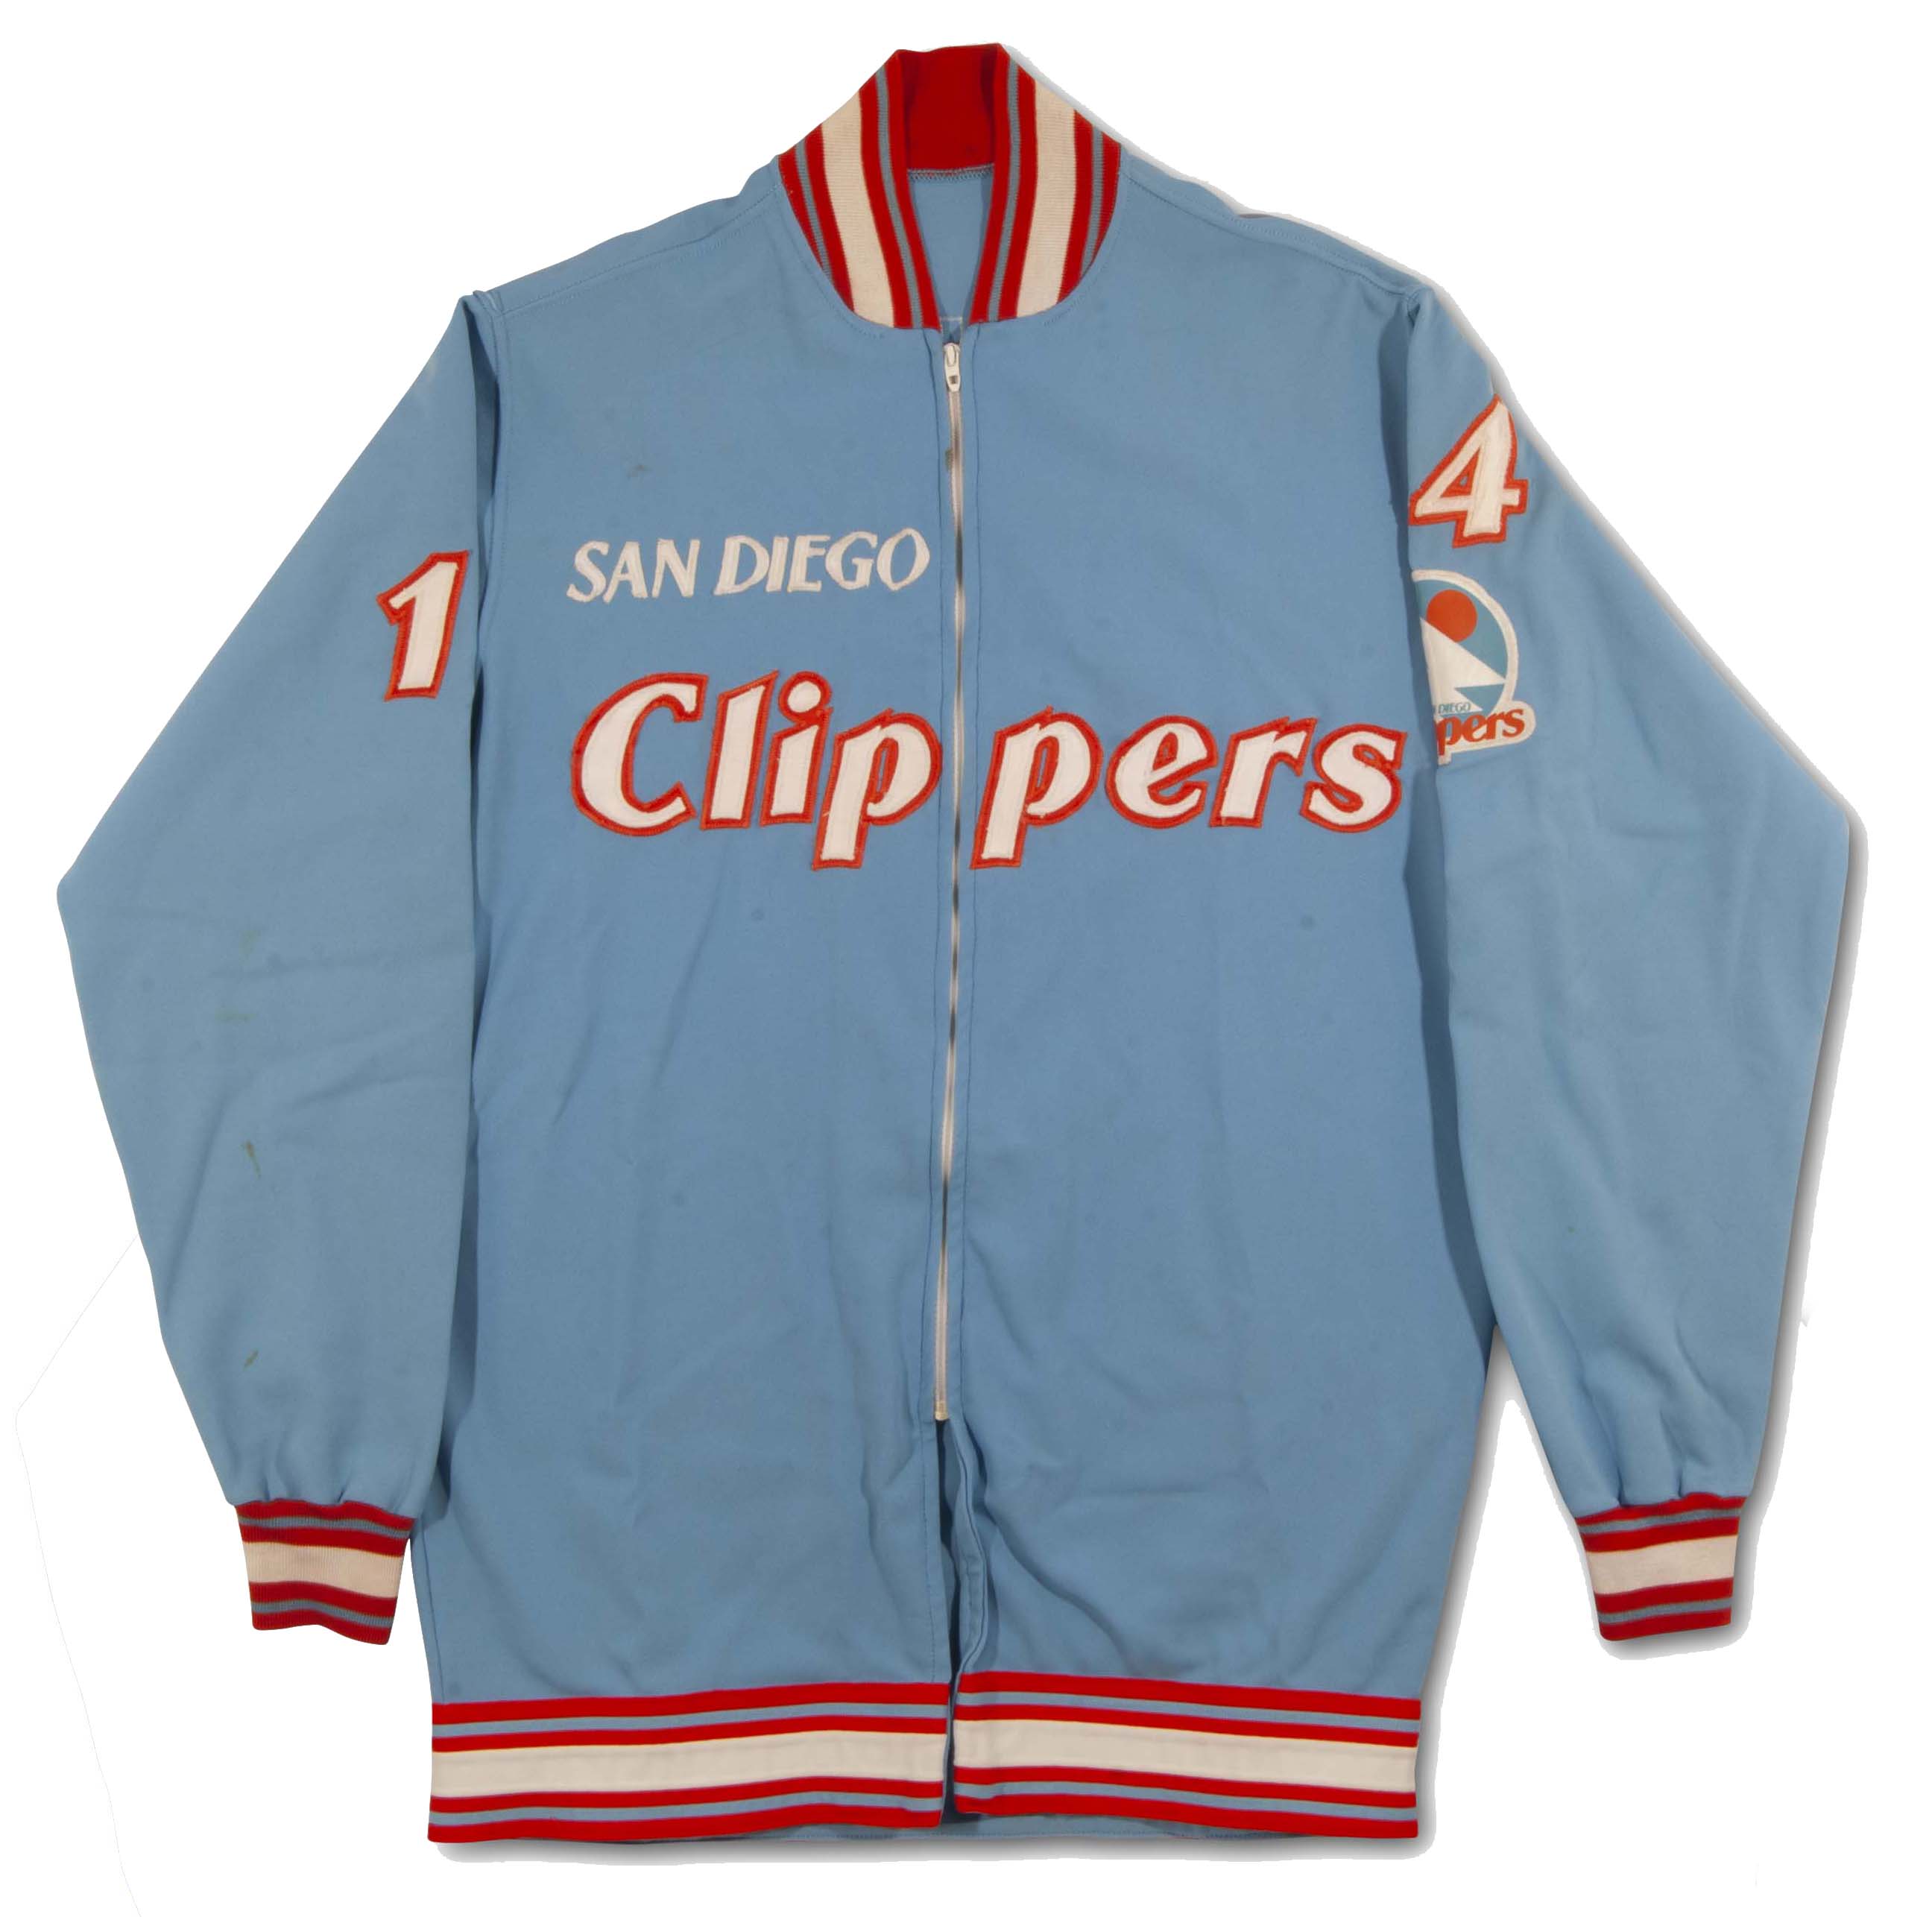 world b free clippers jersey